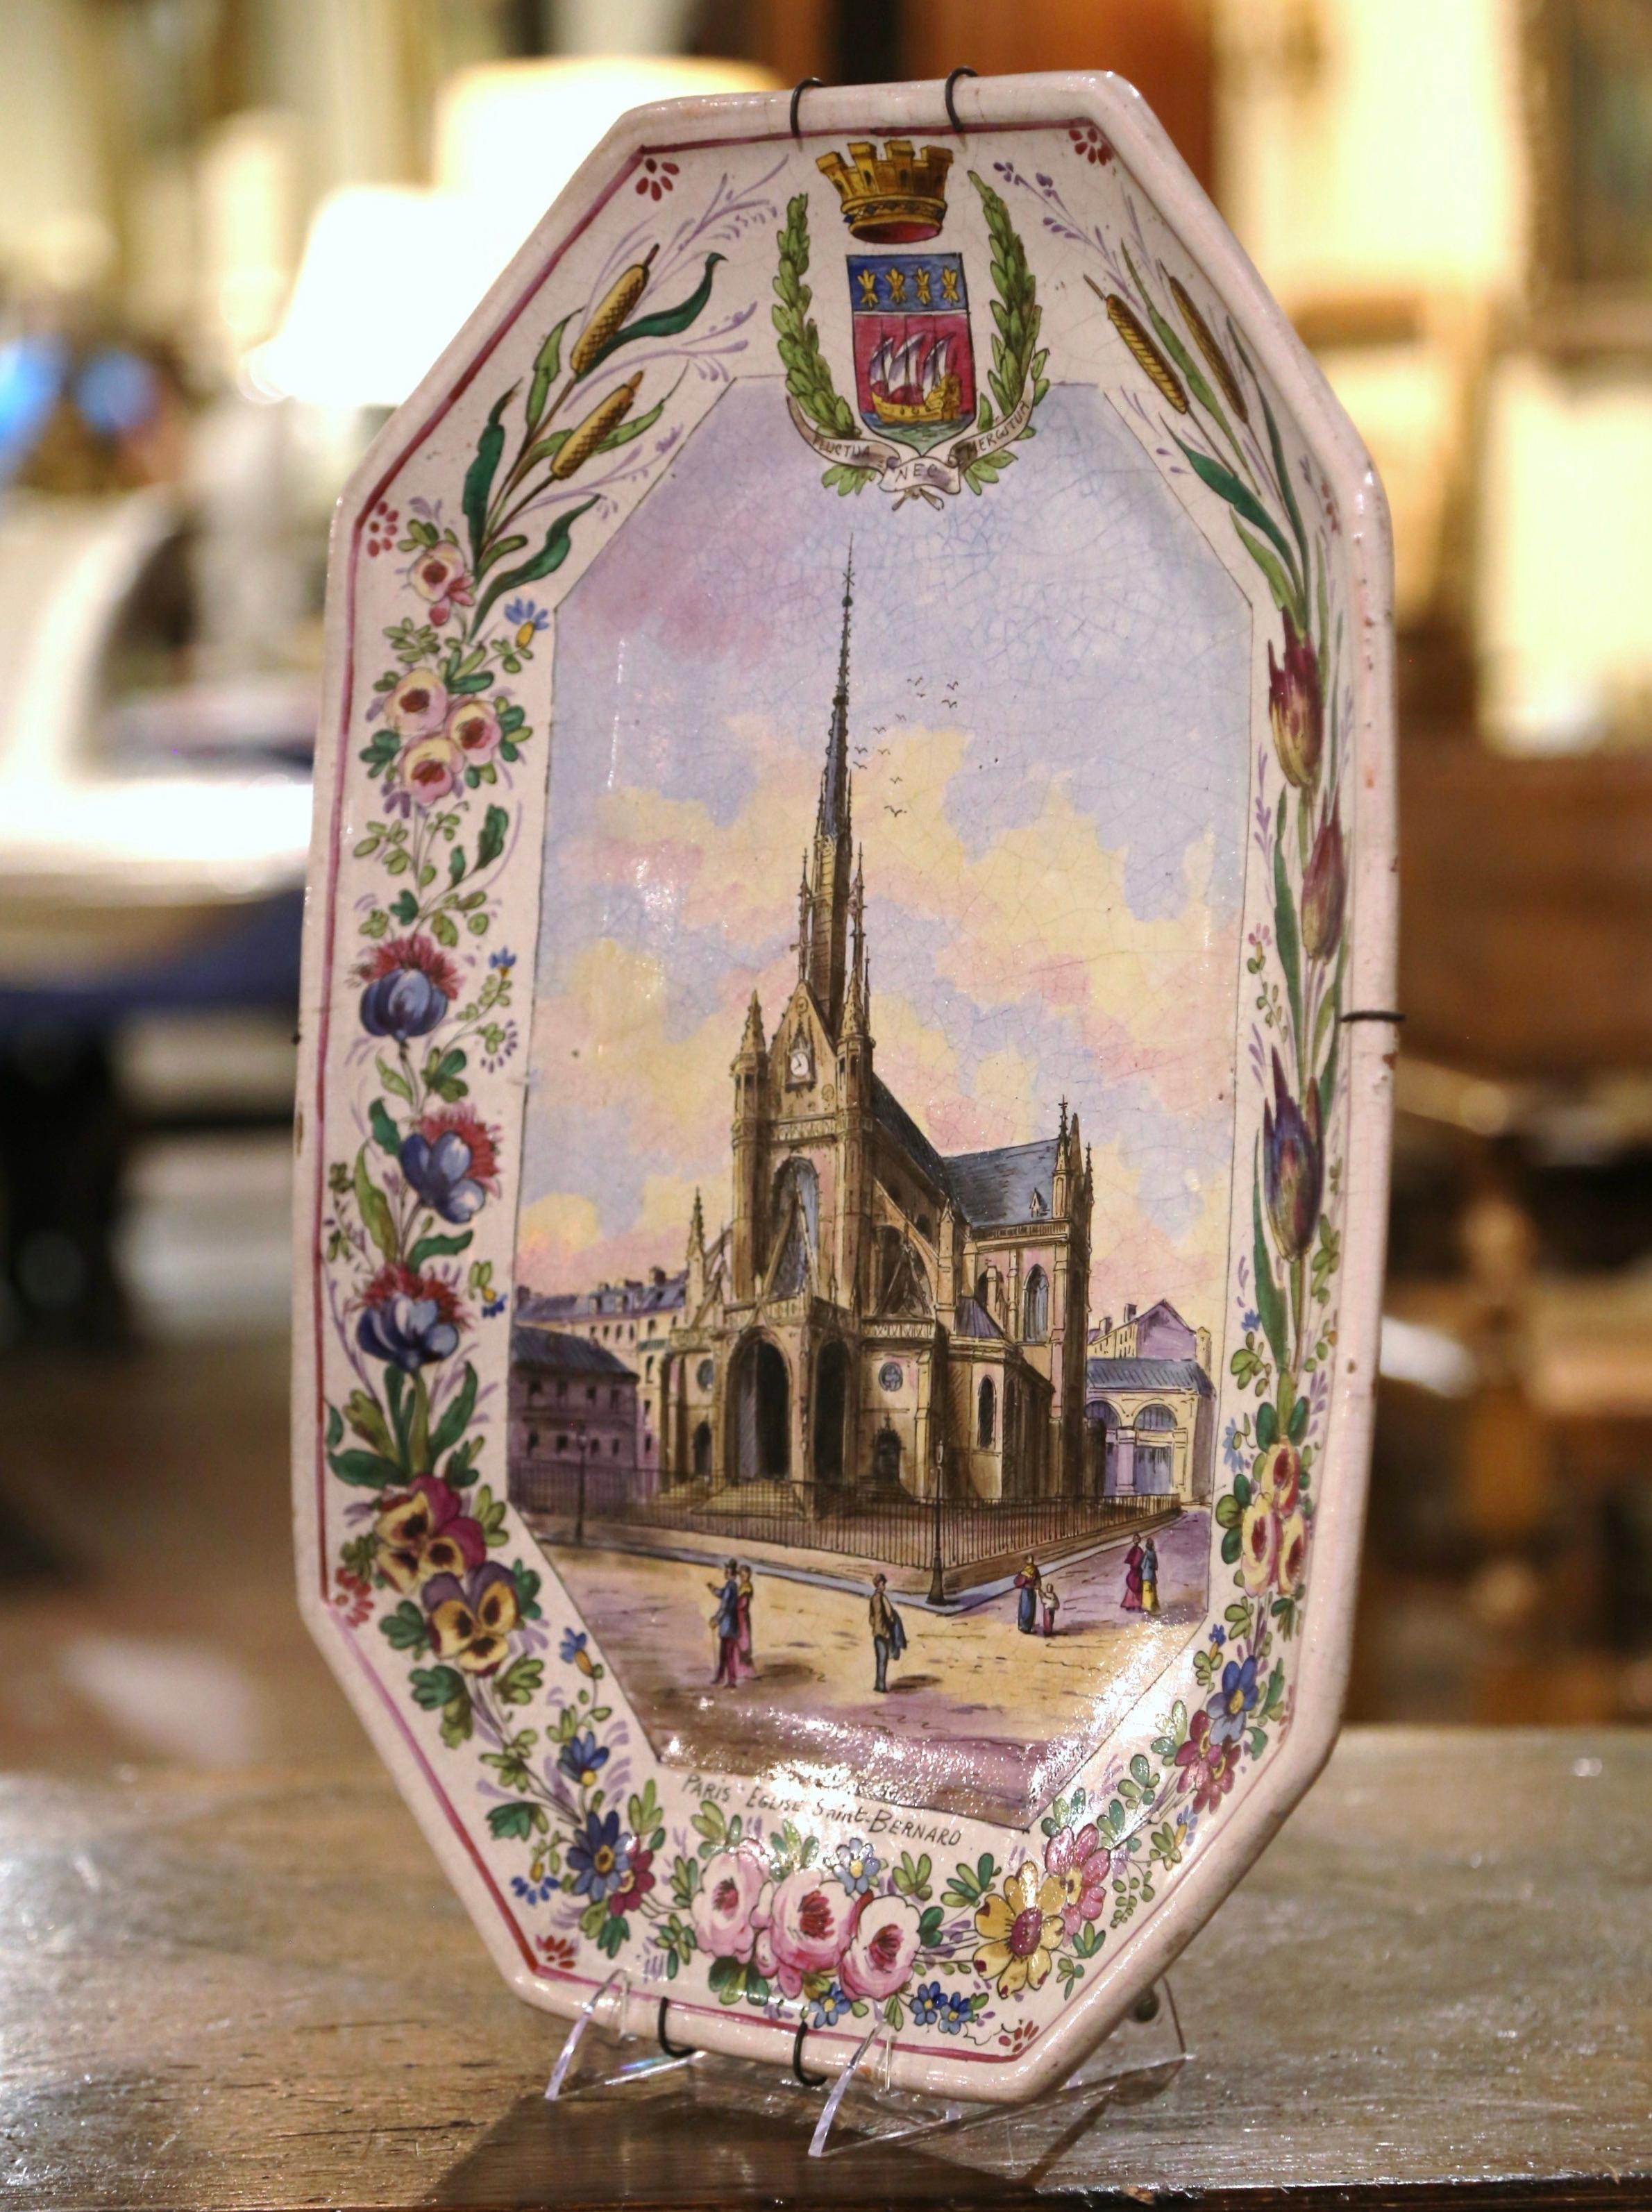 Decorate a wall or a shelf with this important colorful antique platter. Created in France circa 1895, the large hand painted ceramic plate depicts the magnificent Eglise Saint-Bernard, or The Church of St. Bernard in Paris. The painted scene is